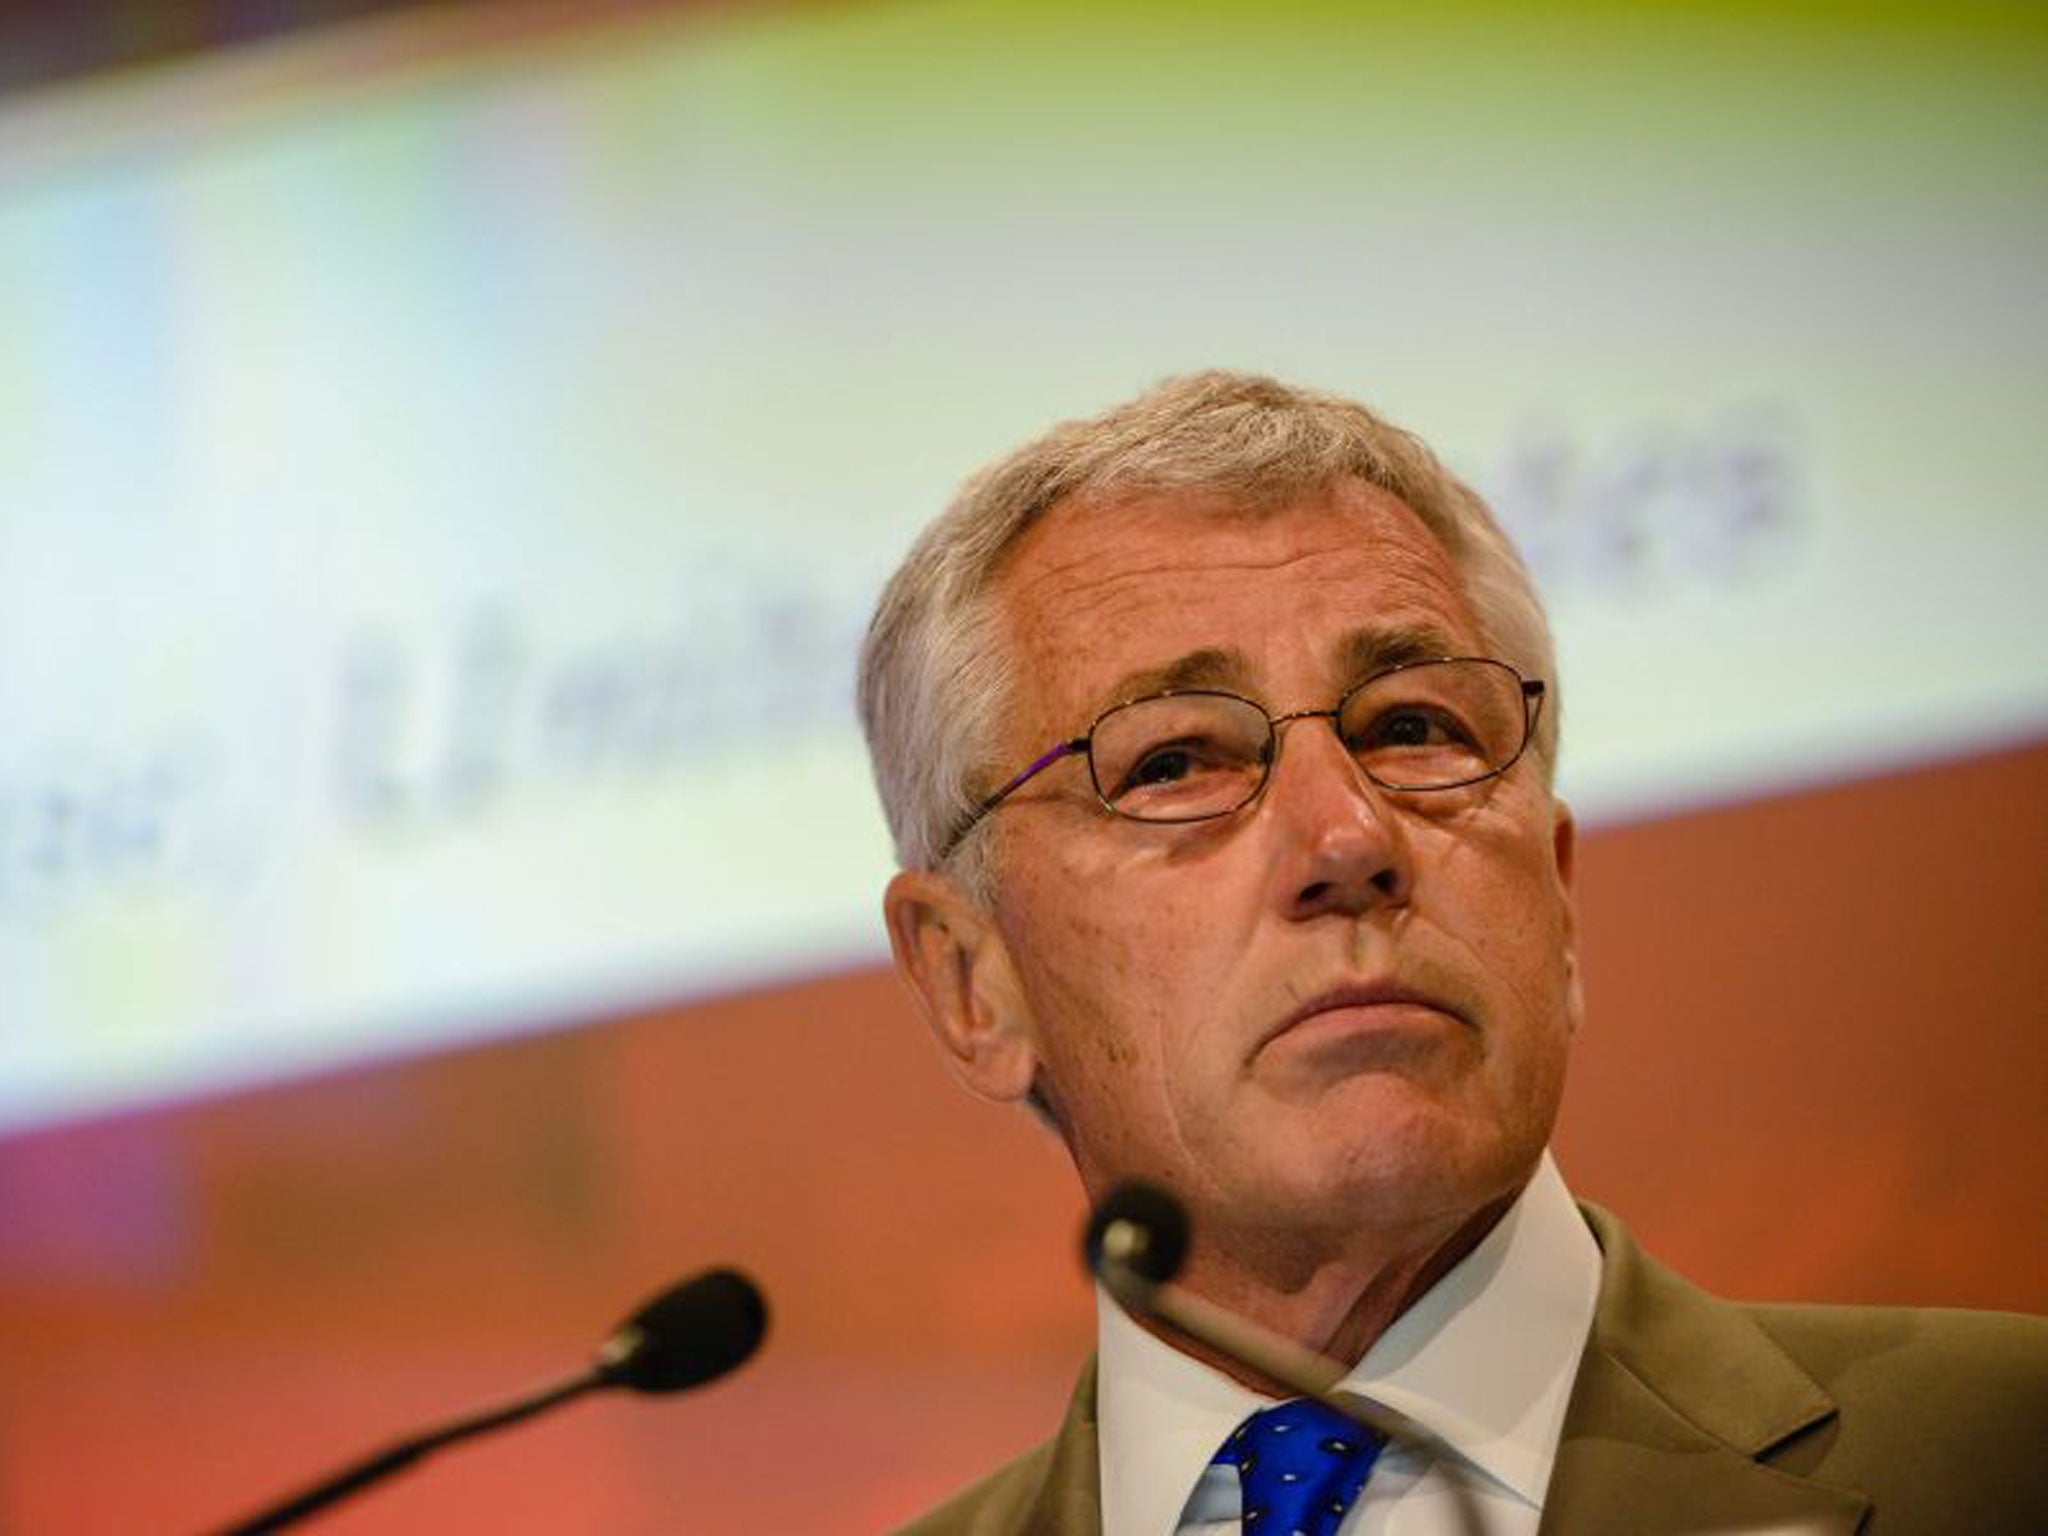 Hagel spoke of his "firm belief that the arc of the 21st century would be shaped by events here in Asia"